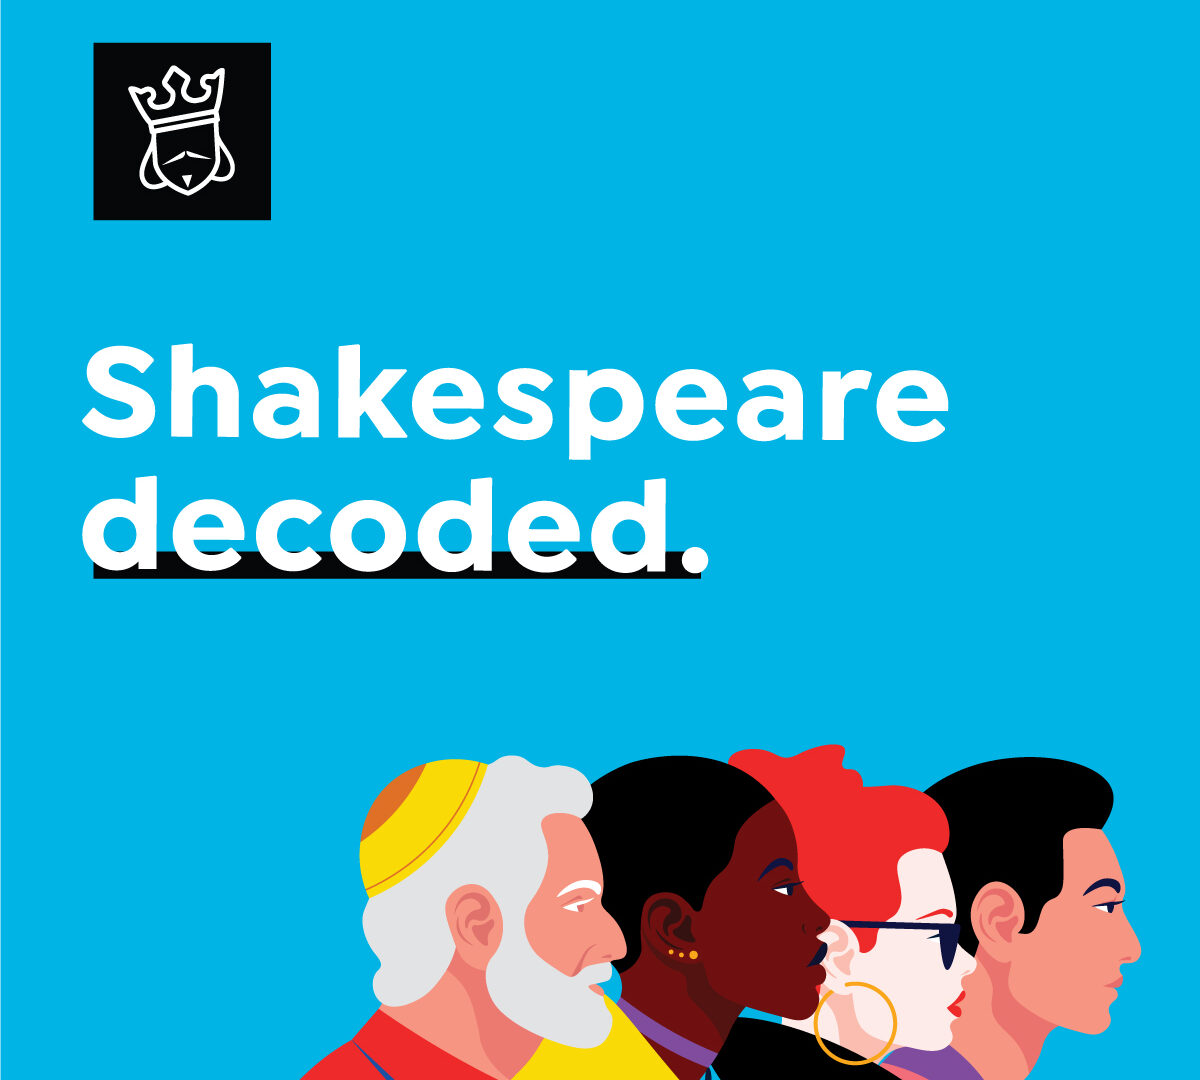 Shakespeare decoded. White test on a bright sky blue background. There are four simplified vector images of people facing right: A pale older man with white hair and beard wearing a kippah. The second is a woman with dark skin and closely shaved black hair and three gold ear piercings. Next is a very pale woman with bright red hair piled on top of her head, large gold hoops earrings, and black sunglasses. Finally an acrogenous person with peach skin and black hair in a coif.